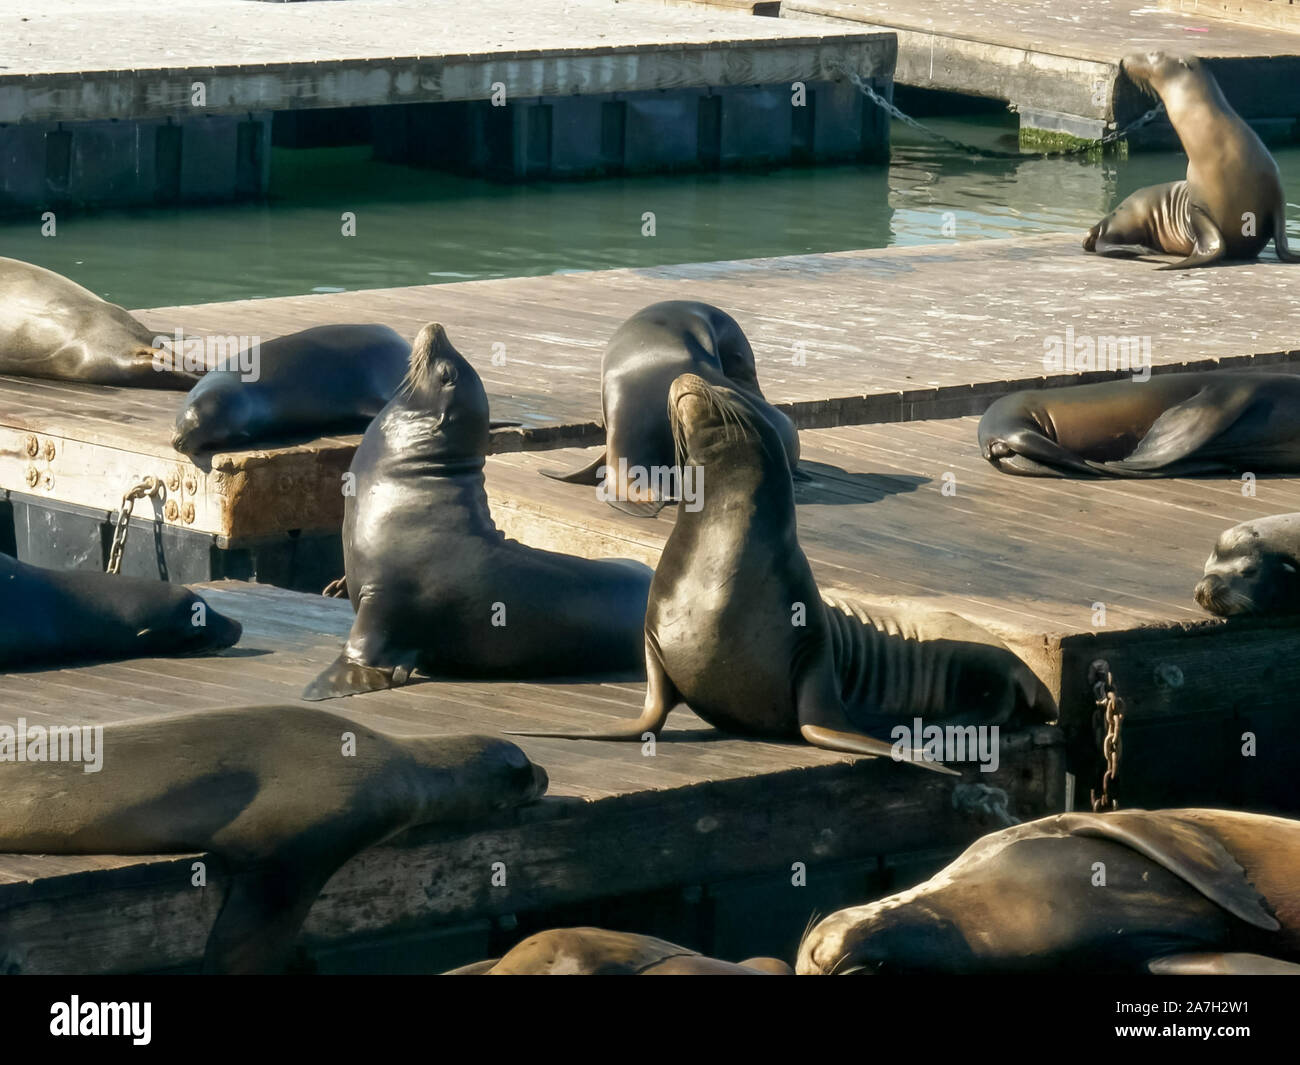 california sea lion posturing on floating pontoons at pier 39 in san francisco Stock Photo